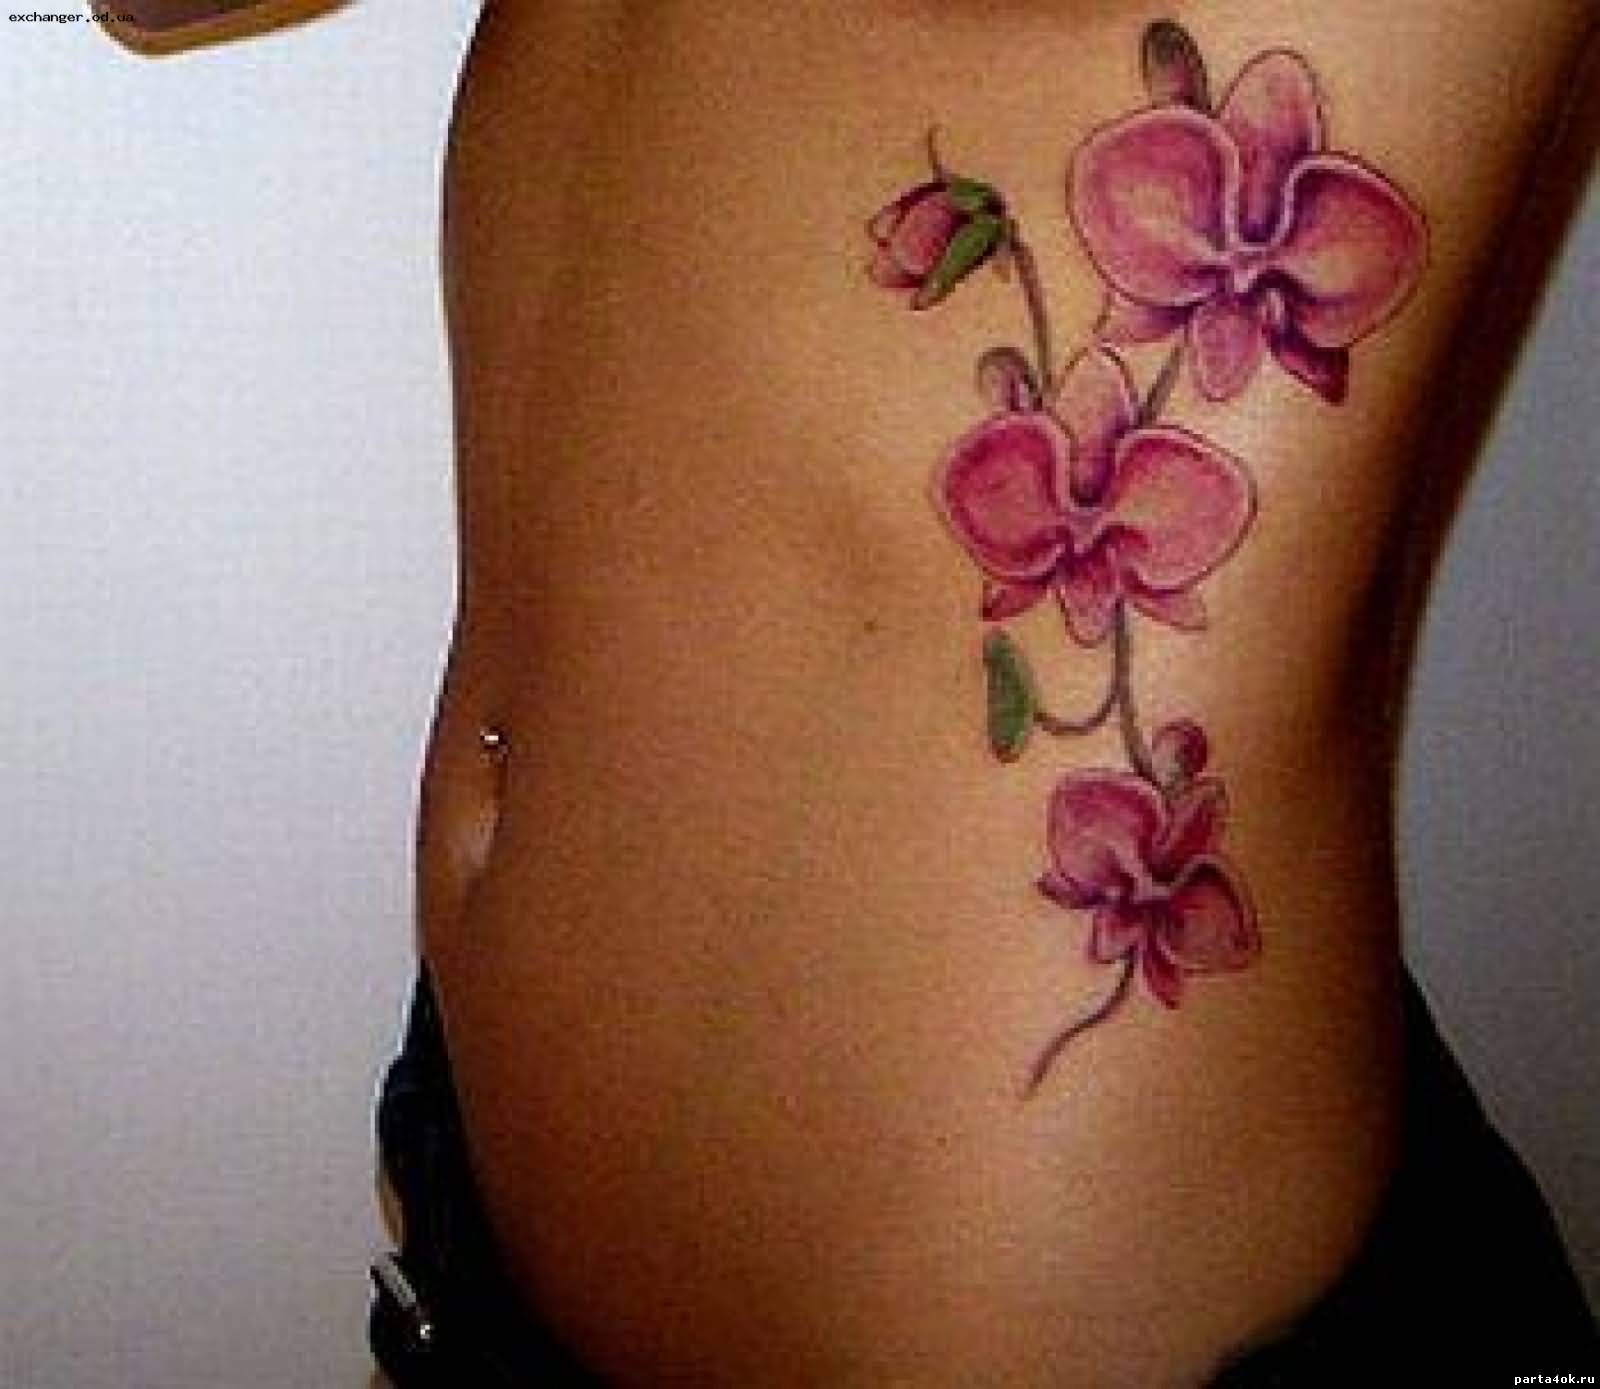 Pink Ink Flowers Tattoo On Rib Cage